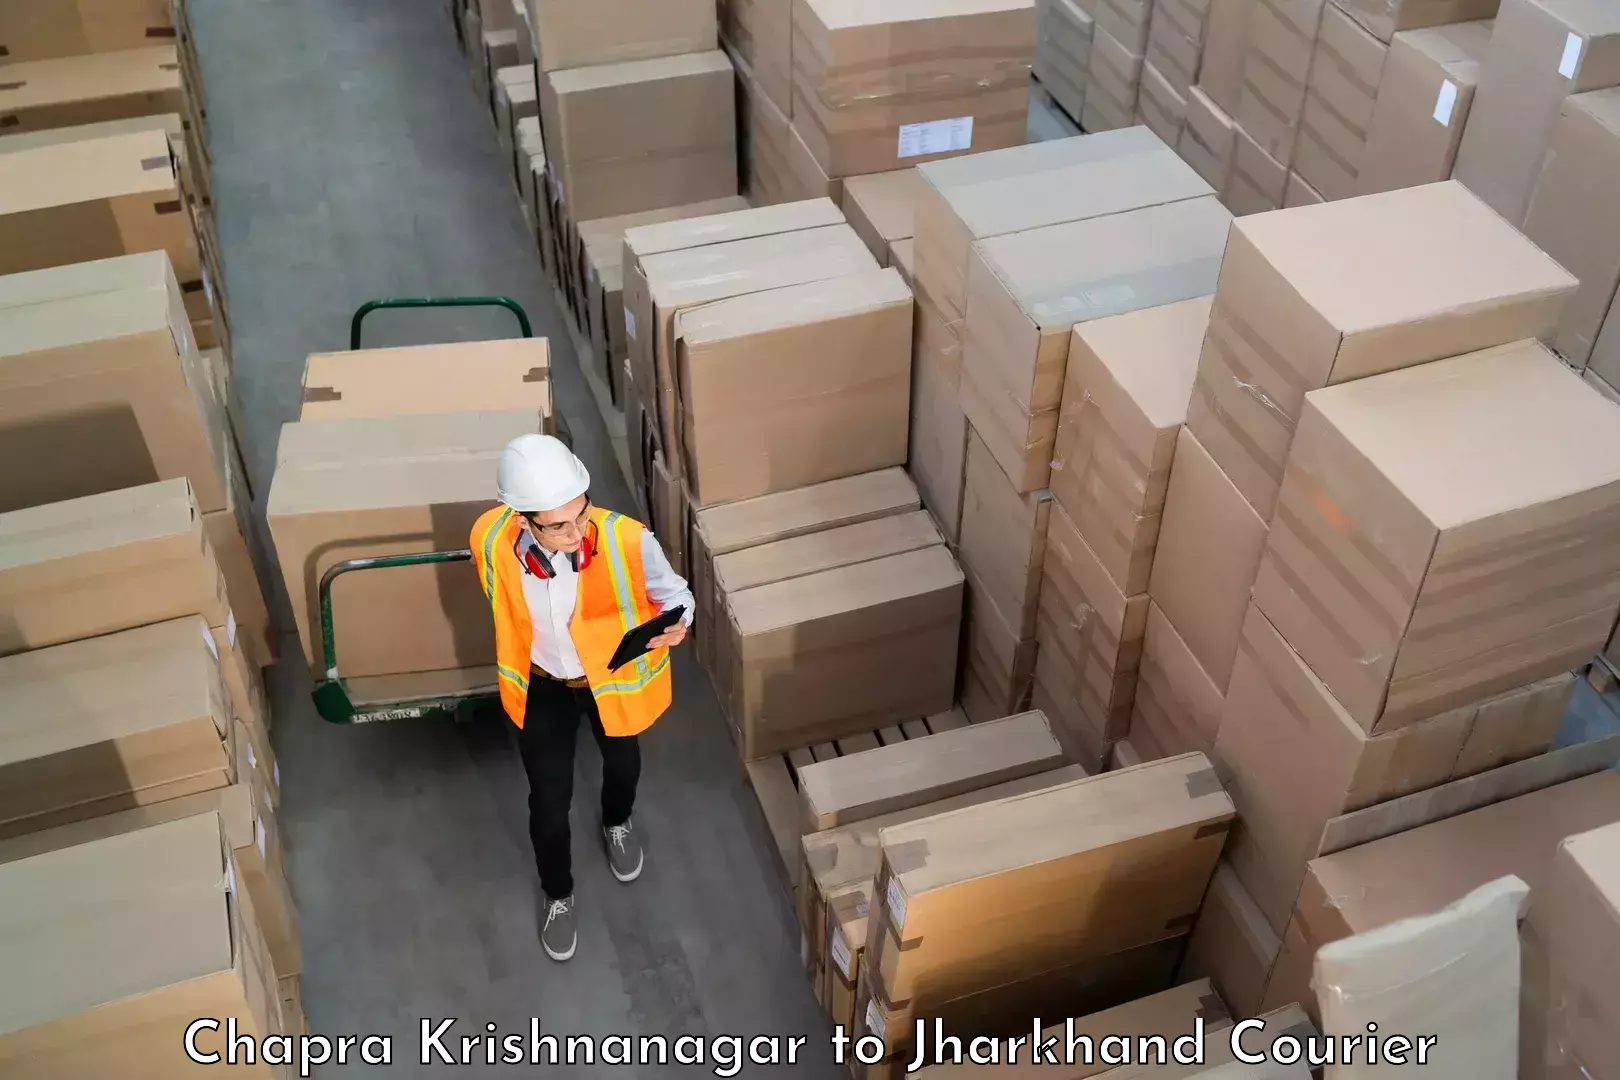 Baggage delivery technology in Chapra Krishnanagar to Jharkhand